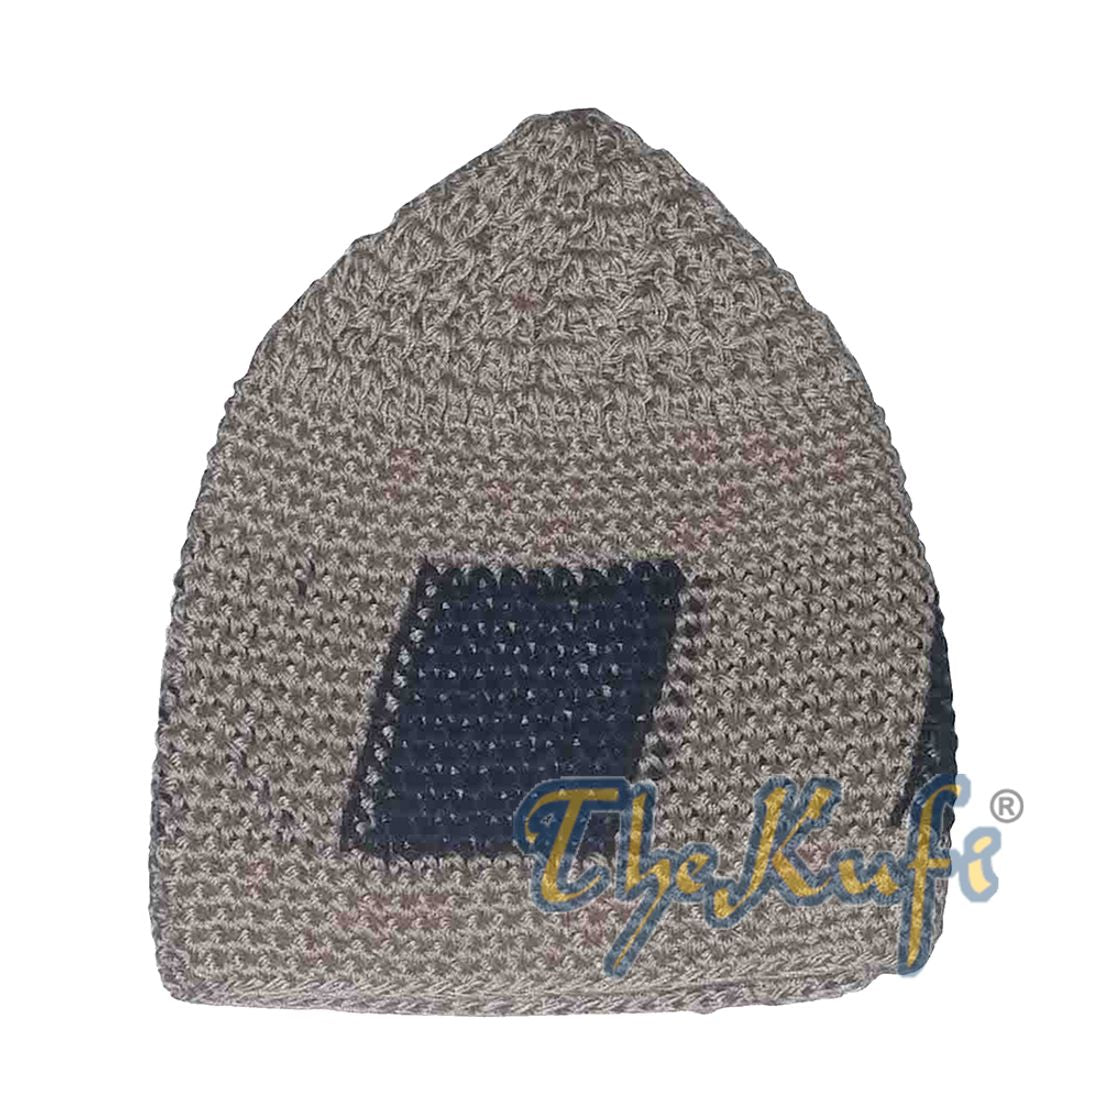 Hand-crocheted Khaki Kufi With Black Squares For Kids